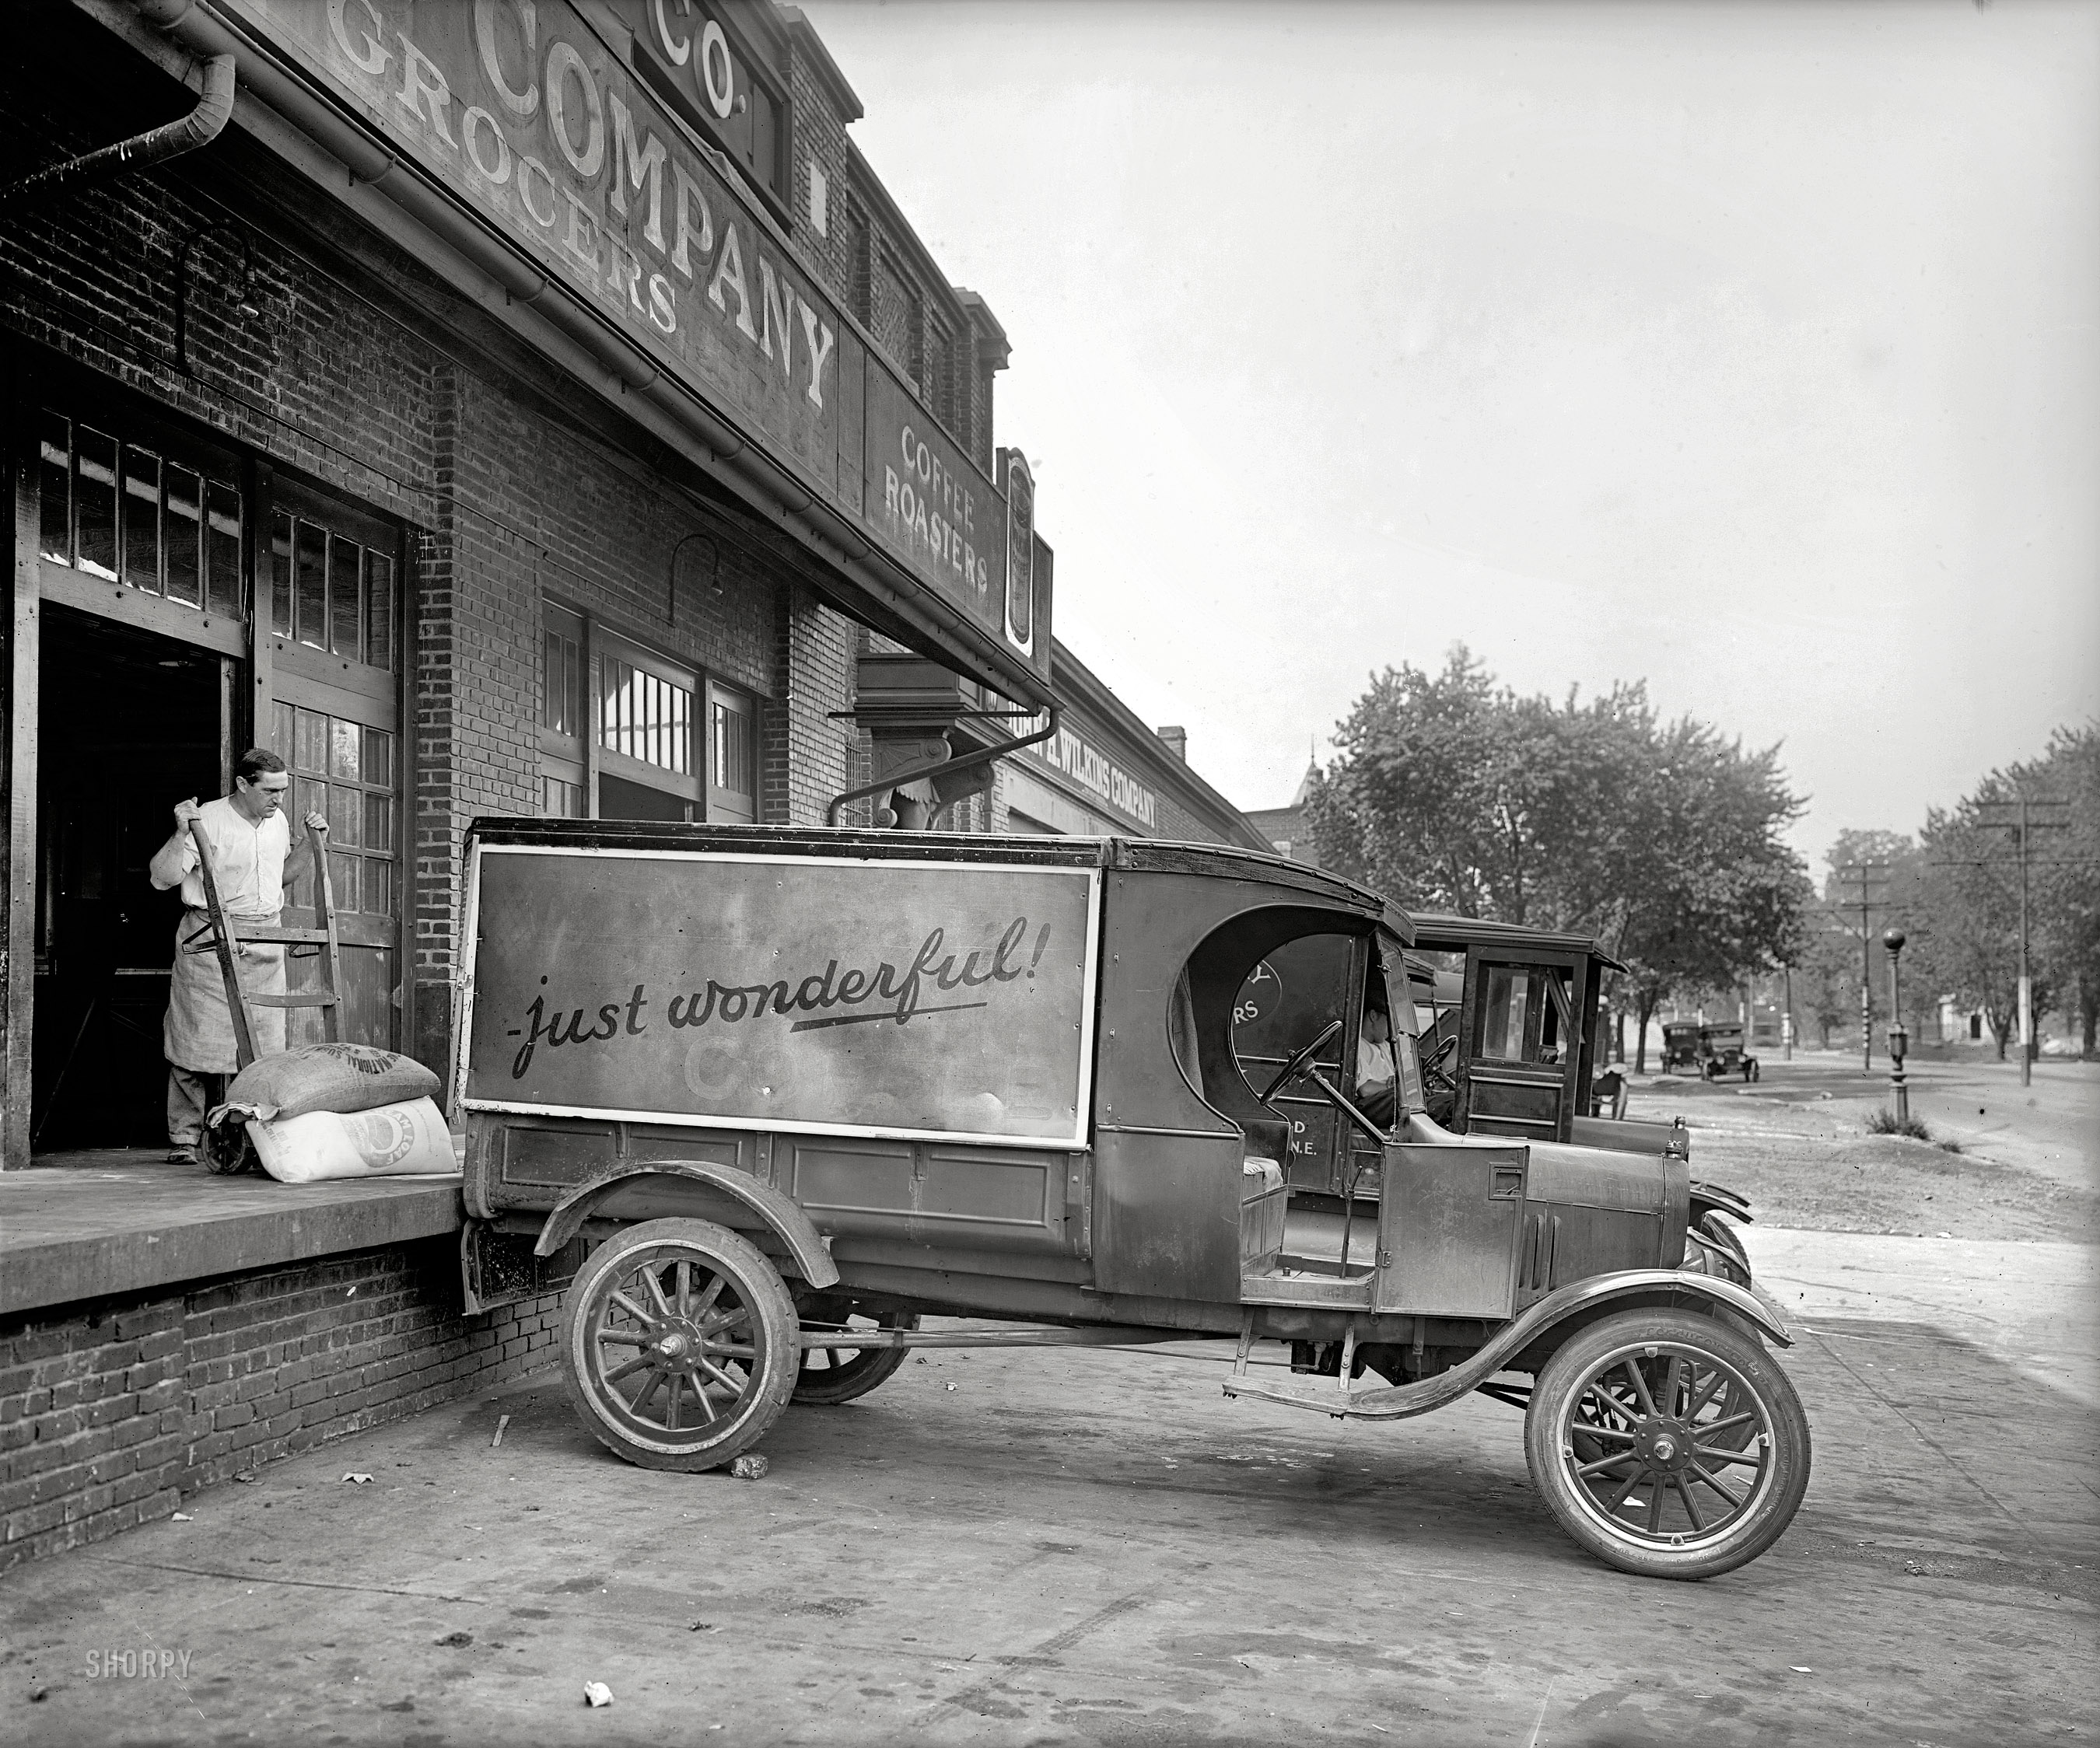 Washington, D.C., circa 1925. "Ford Motor Co. truck, John H. Wilkins Co." National Photo Company Collection glass negative. View full size.